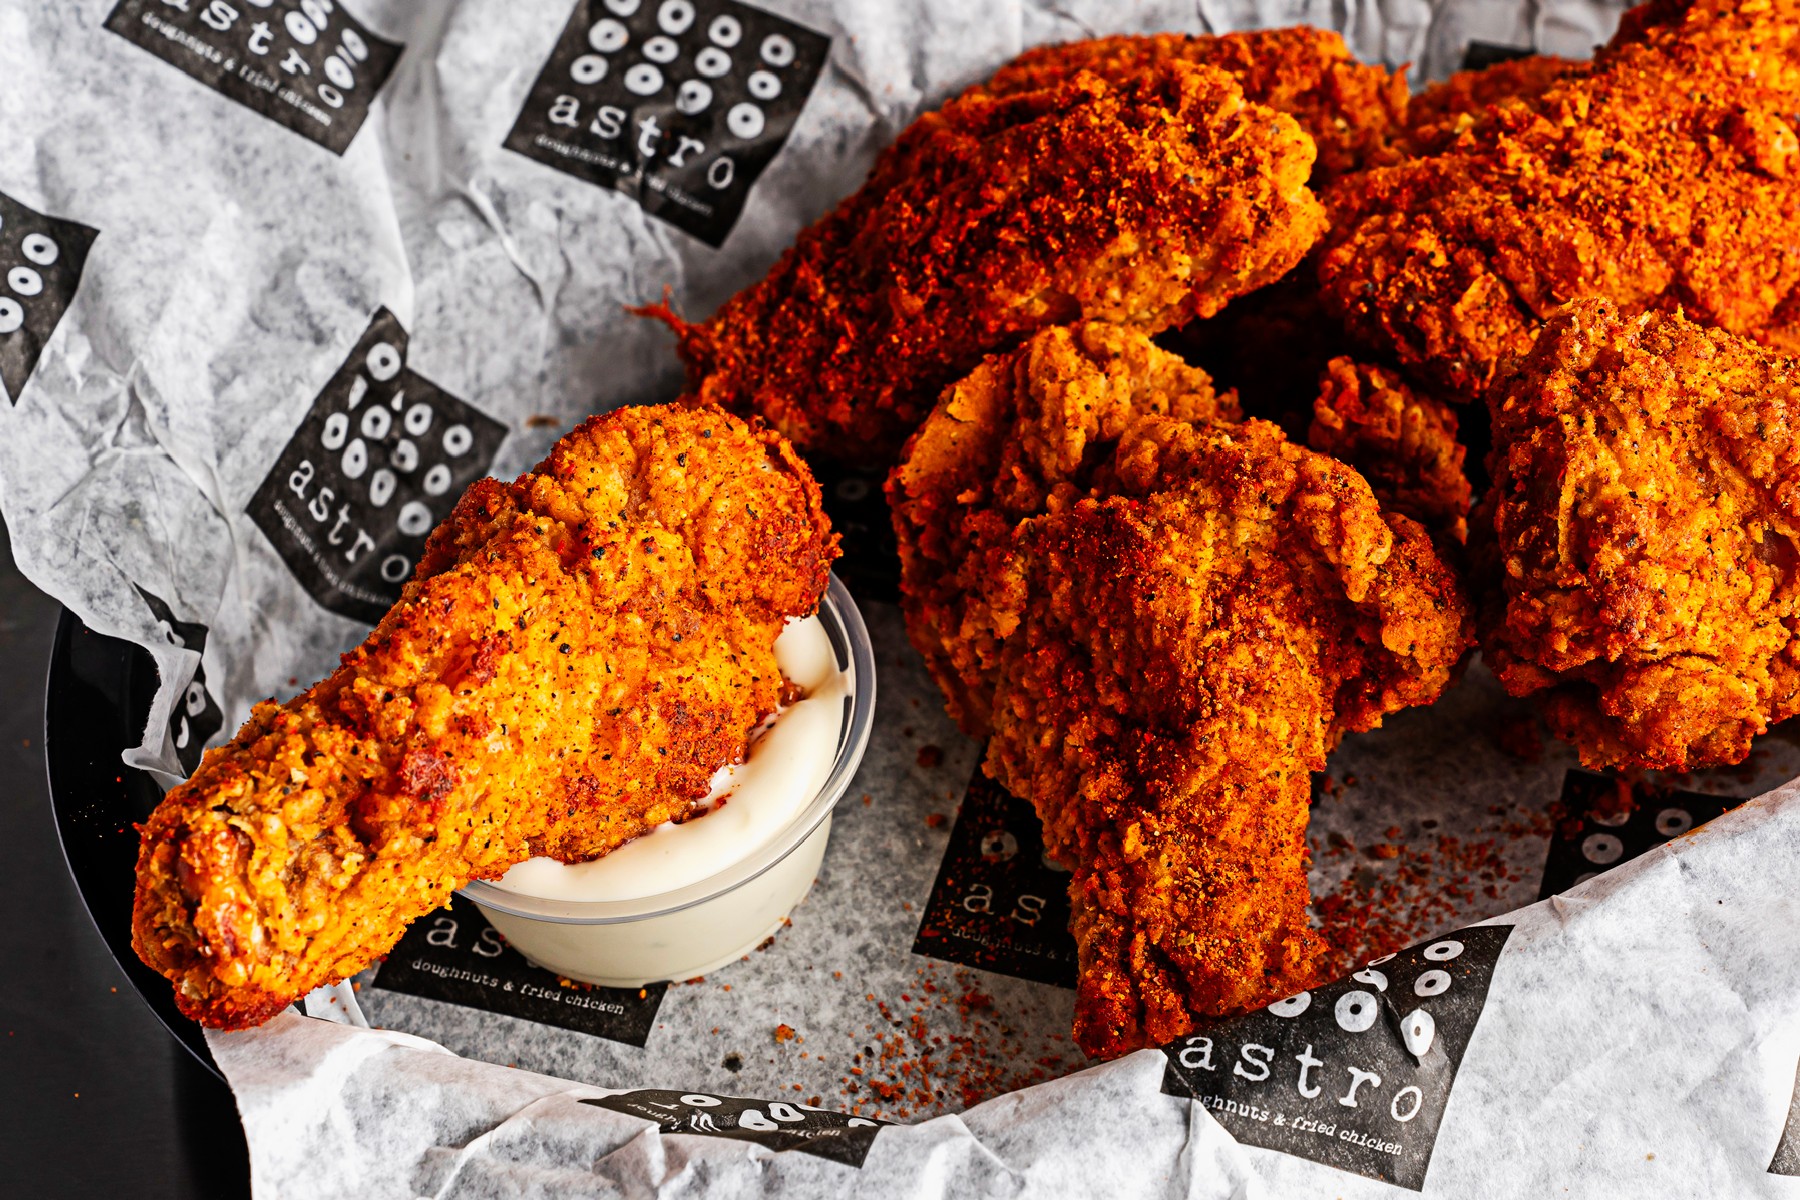 spice-dusted fried chicken with white sauce